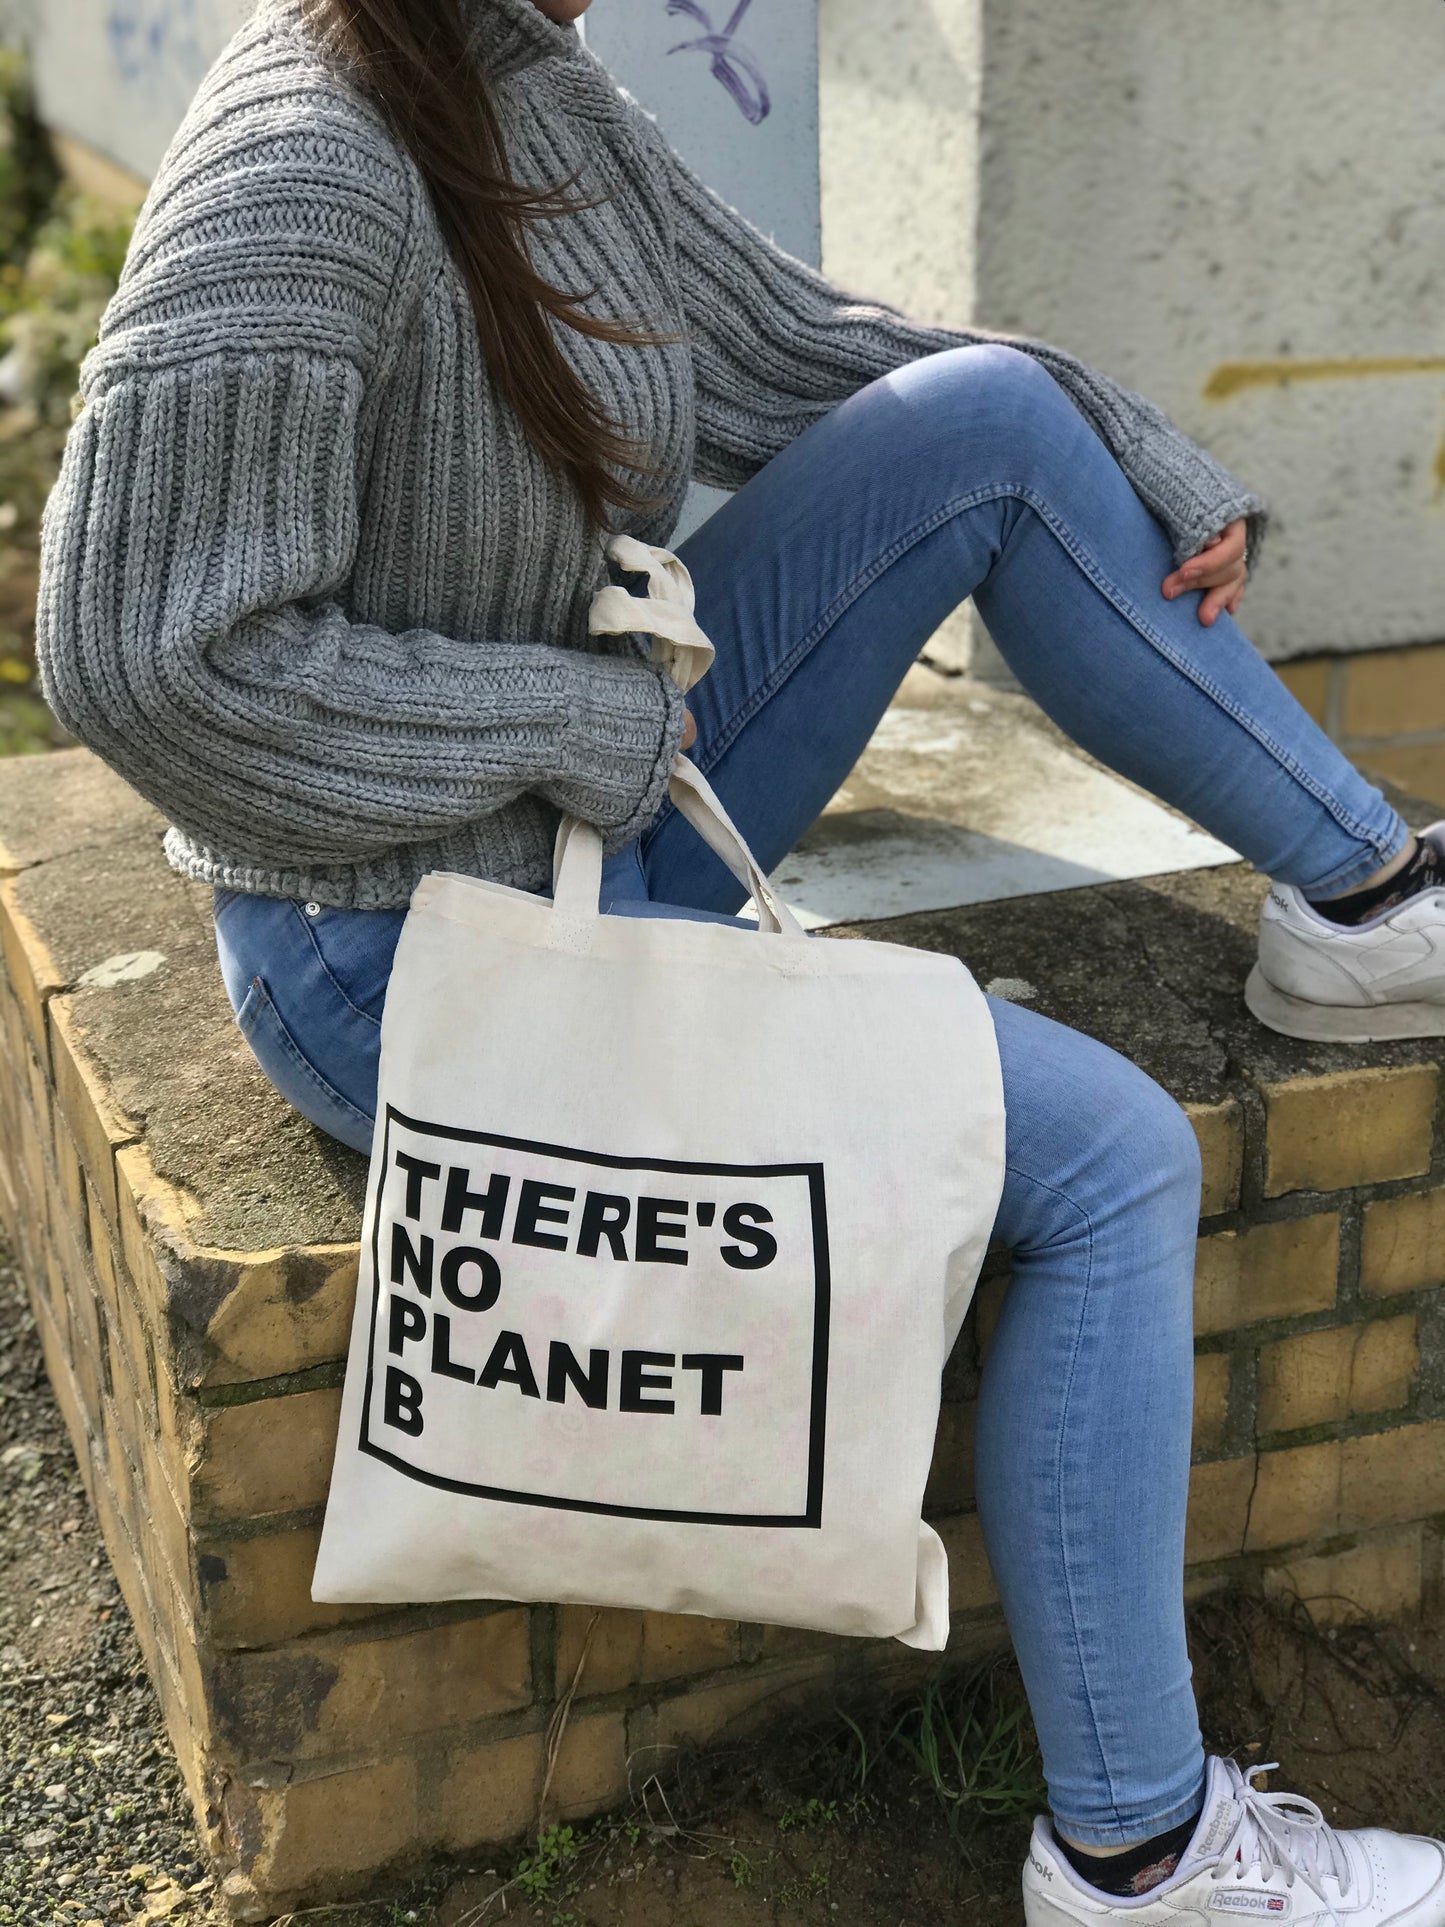 Cotton bag | "There's no planet b"